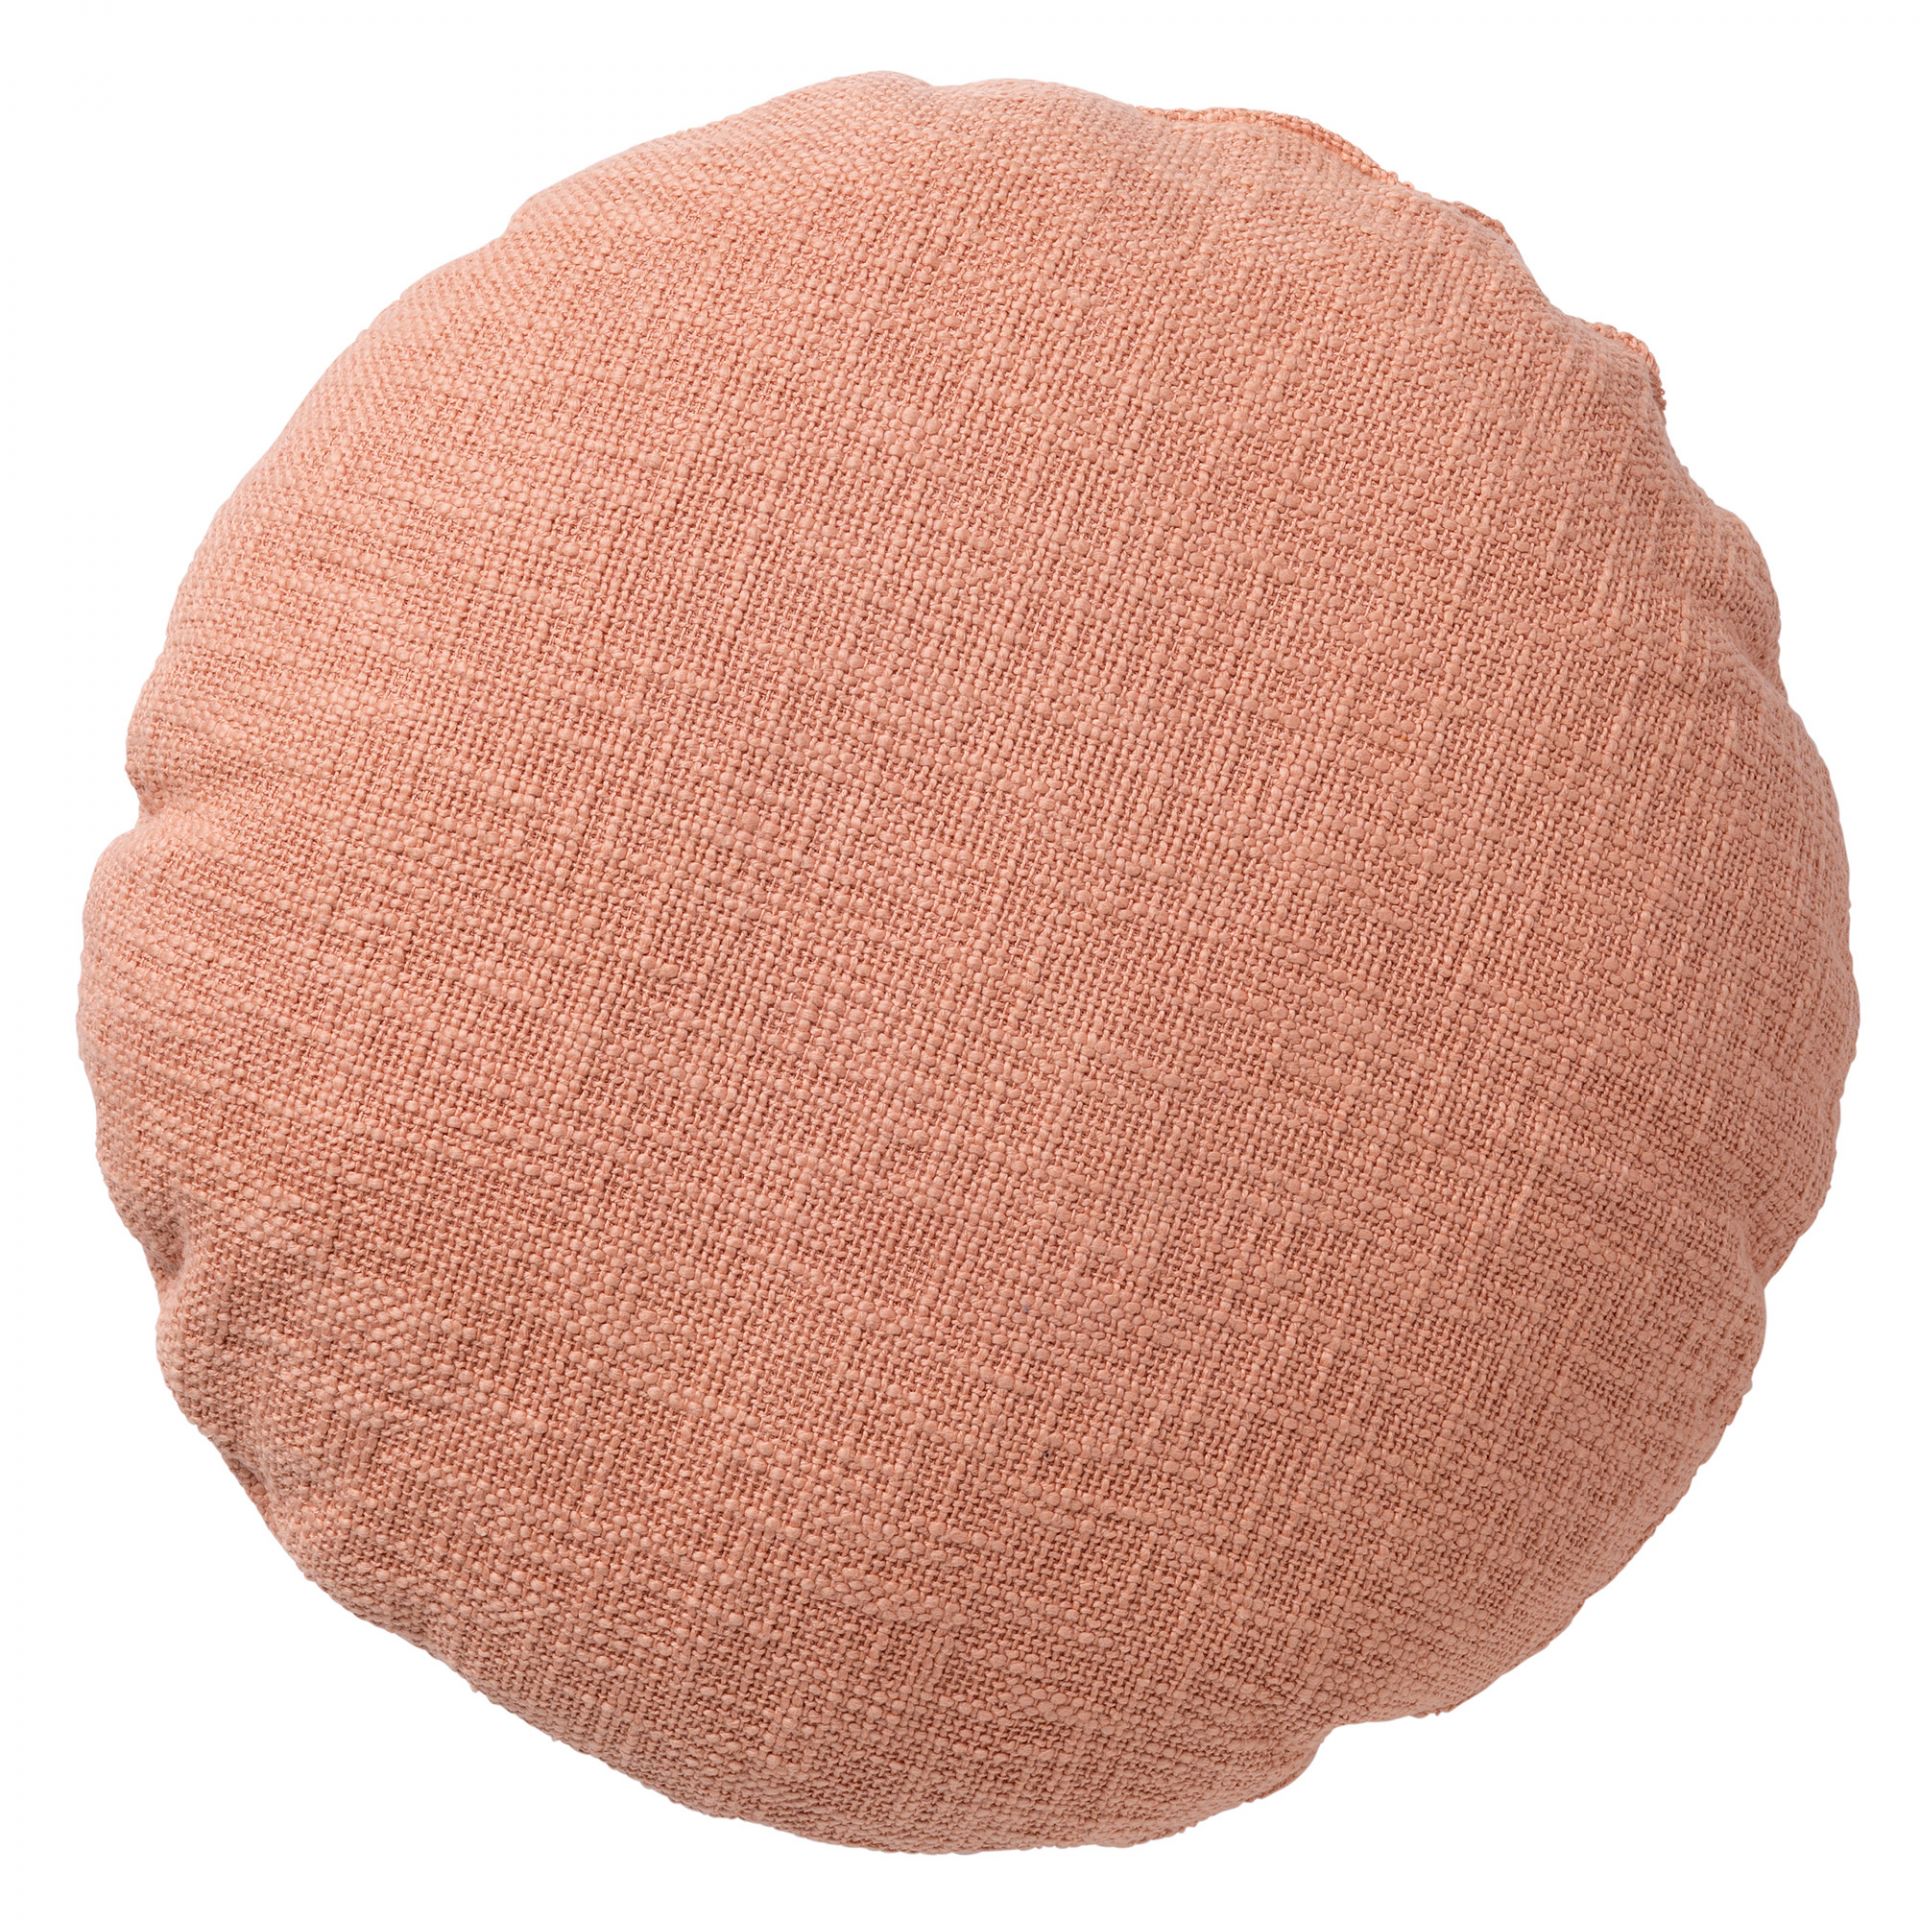 ABEY - Cushion cotton 50 cm Muted Clay - pink